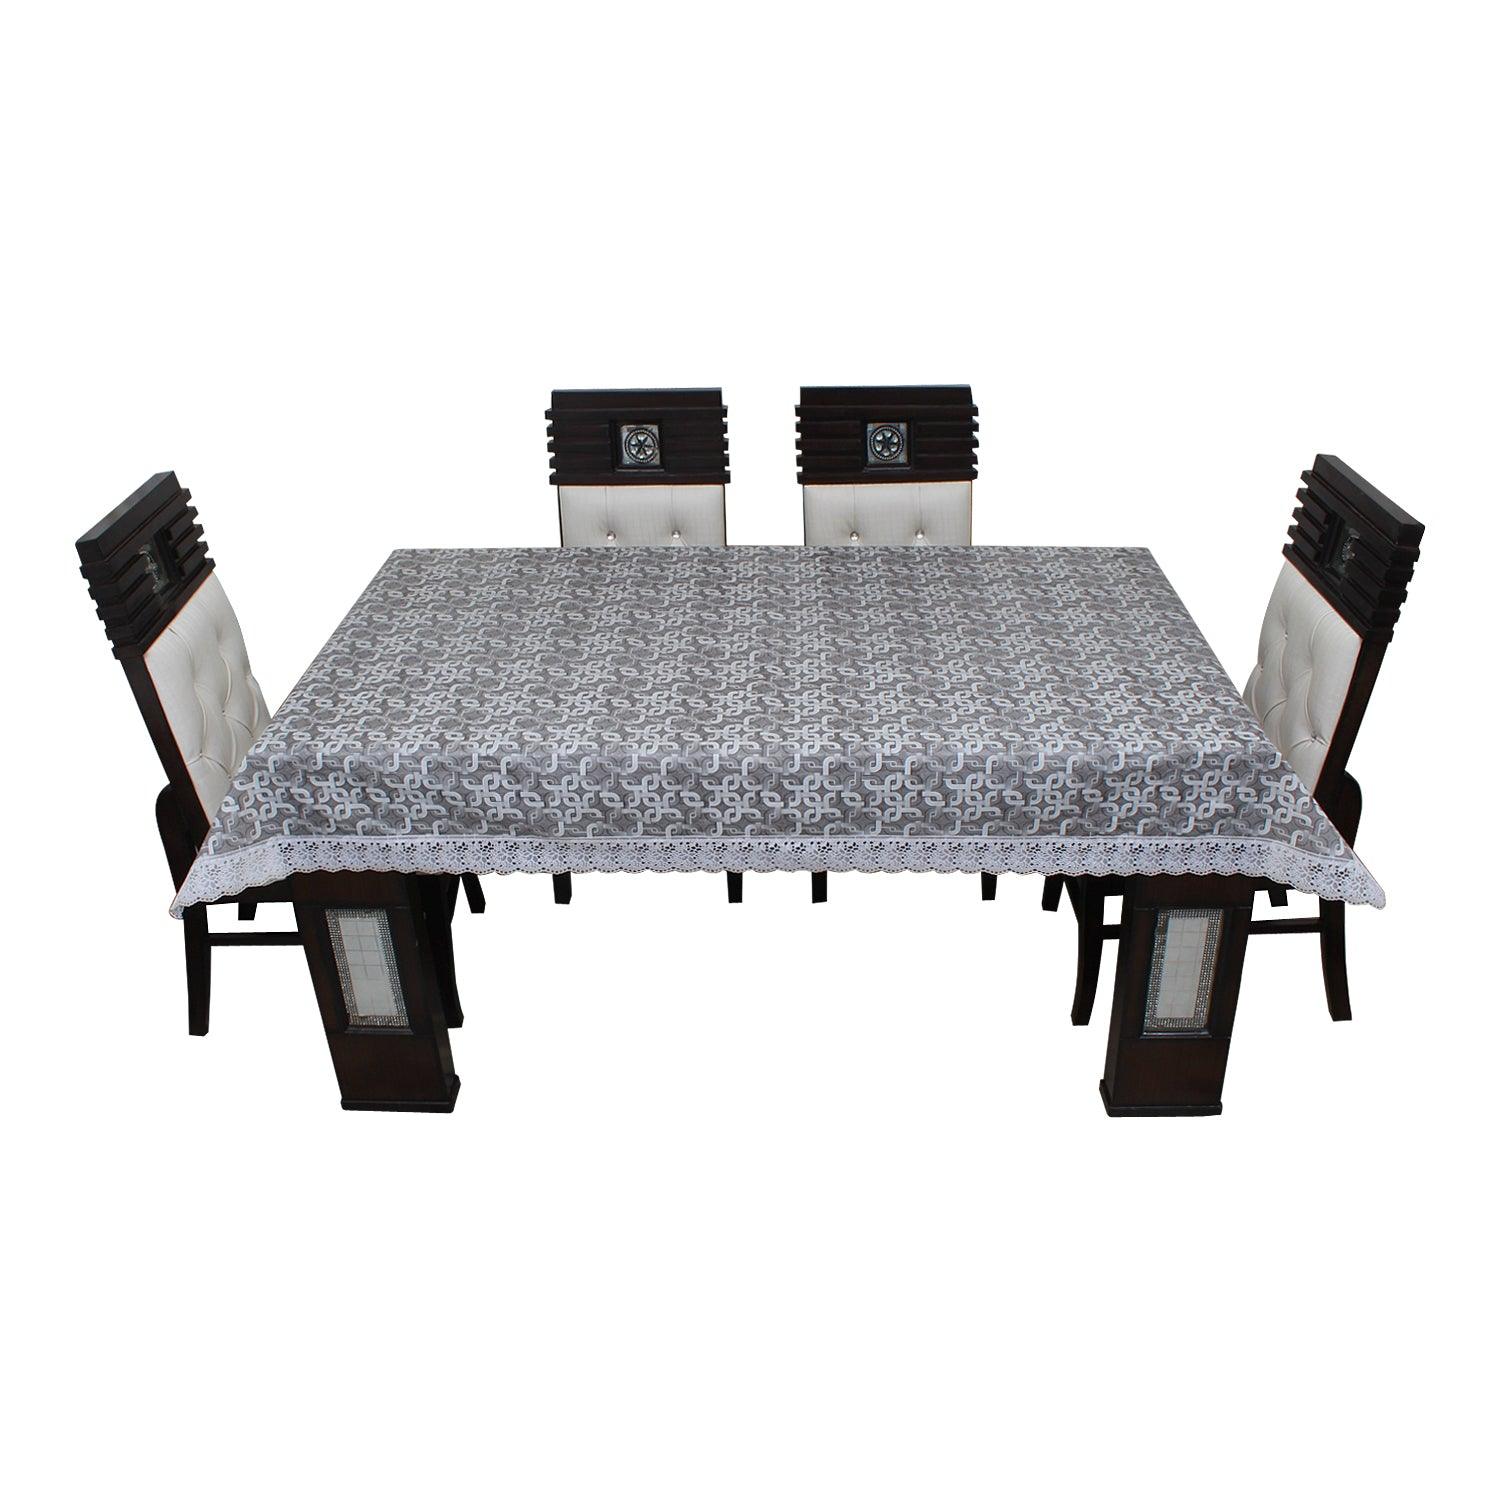 Waterproof and Dustproof Dining Table Cover, SA38 - Dream Care Furnishings Private Limited